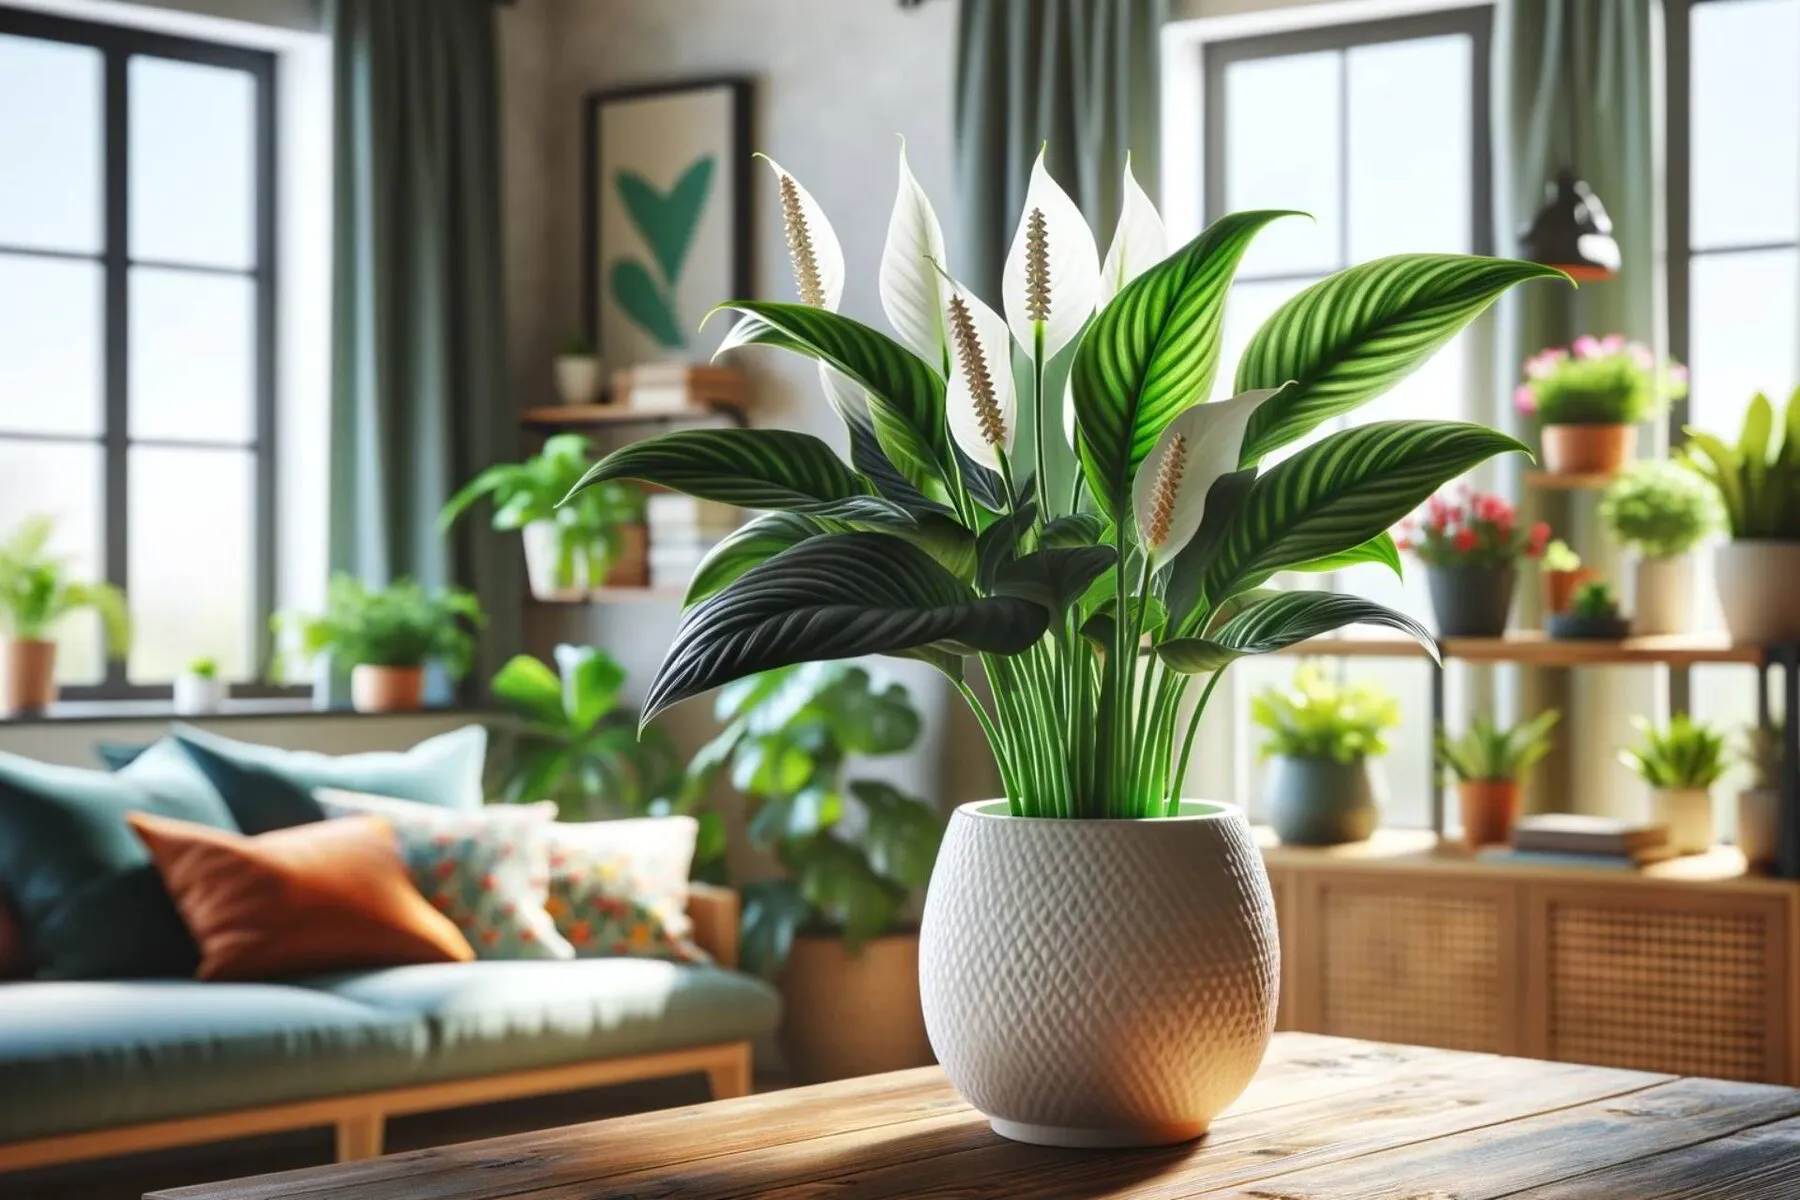 flourishing peace lily plant with its dark green leaves and white blooms, in a stylish white ceramic pot